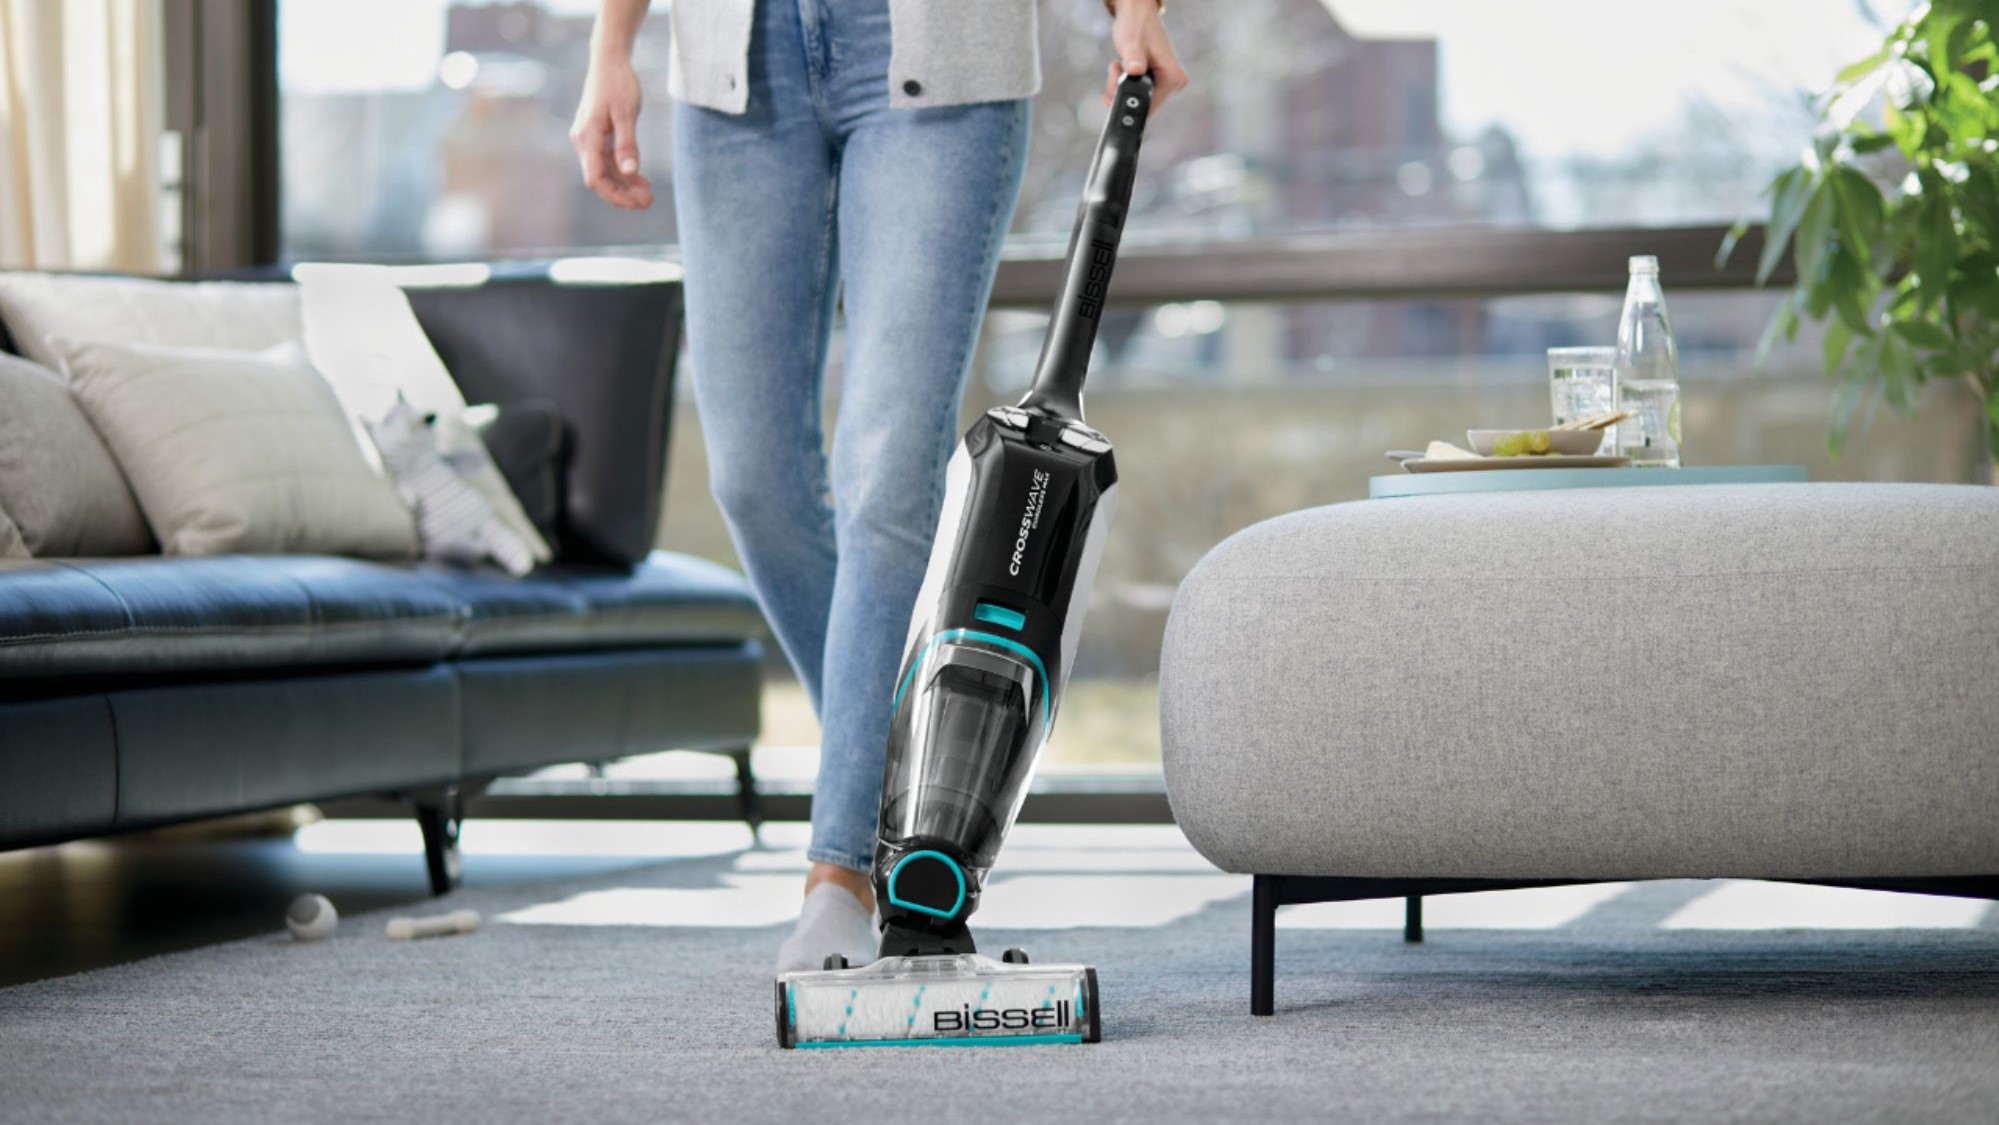 Best steam cleaners and steam mops: 5 buys for a spotless home